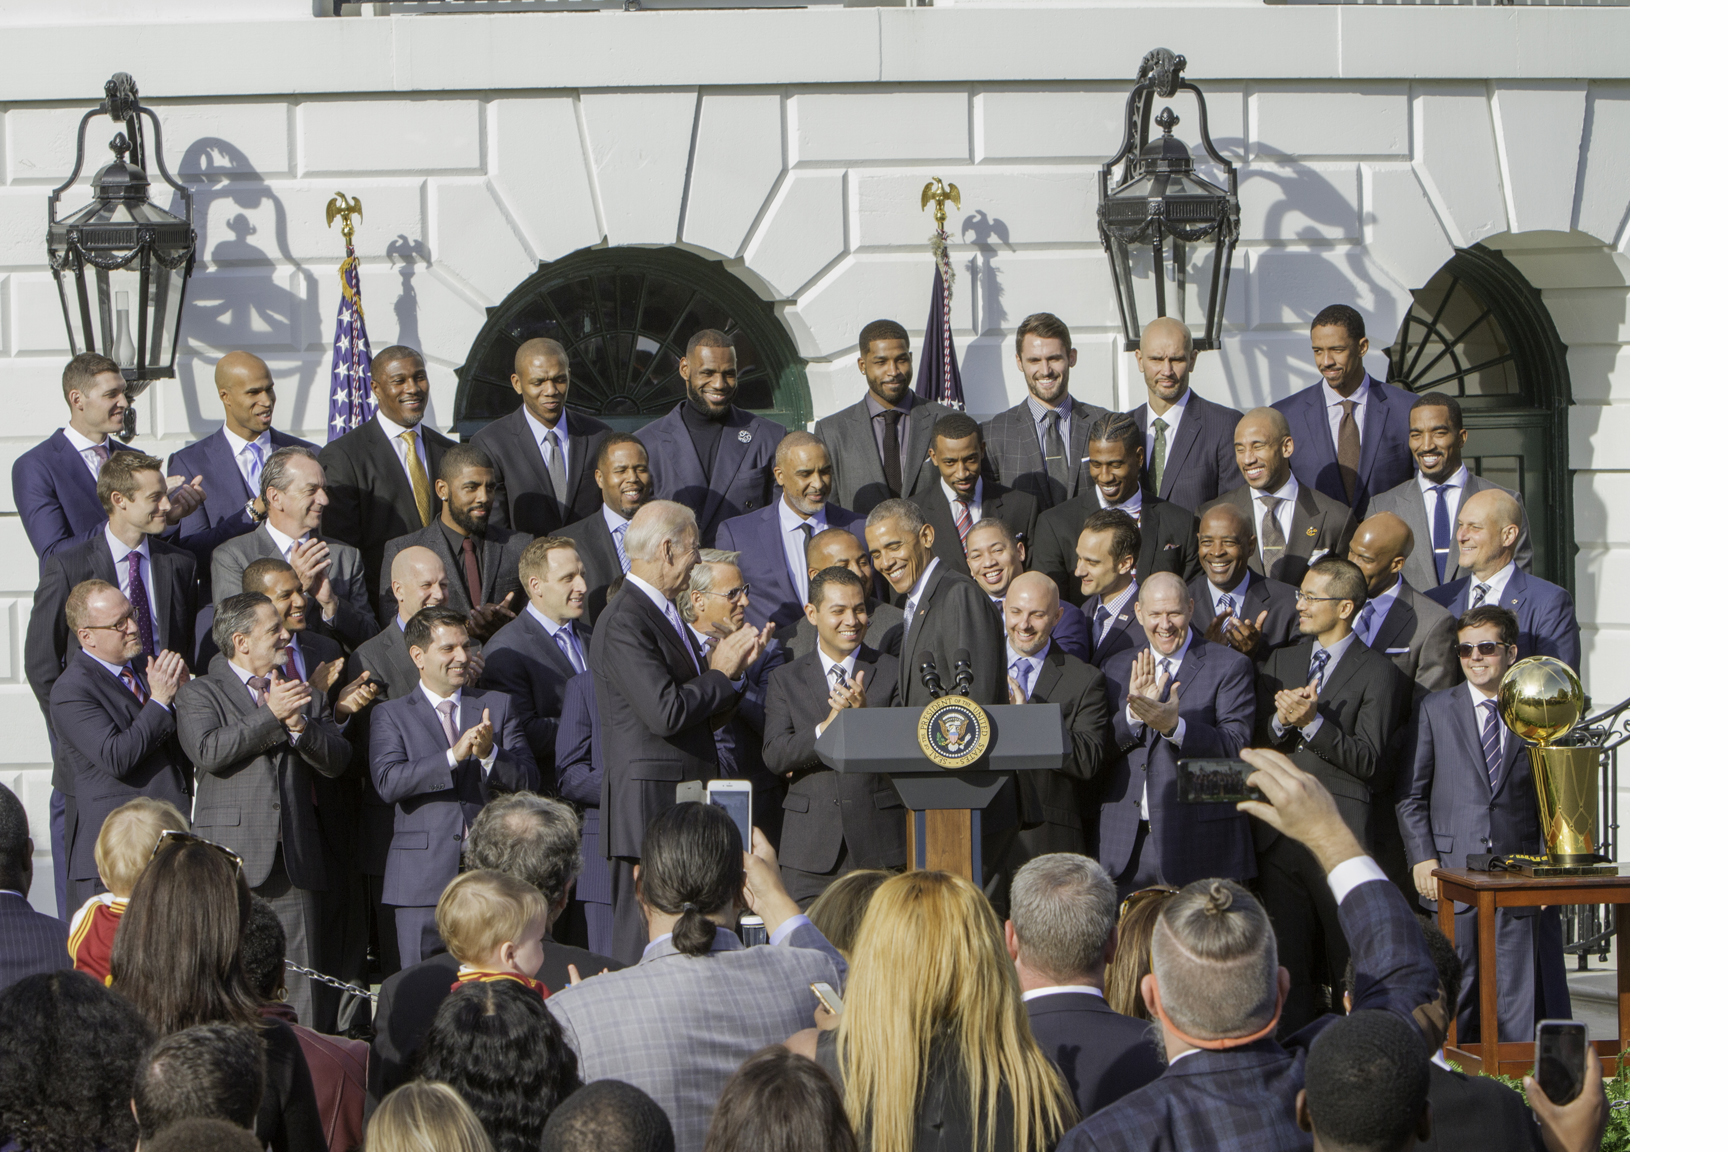 President Barack Obama hosted the 2016 NBA Champion Cleveland Cavaliers at the White House